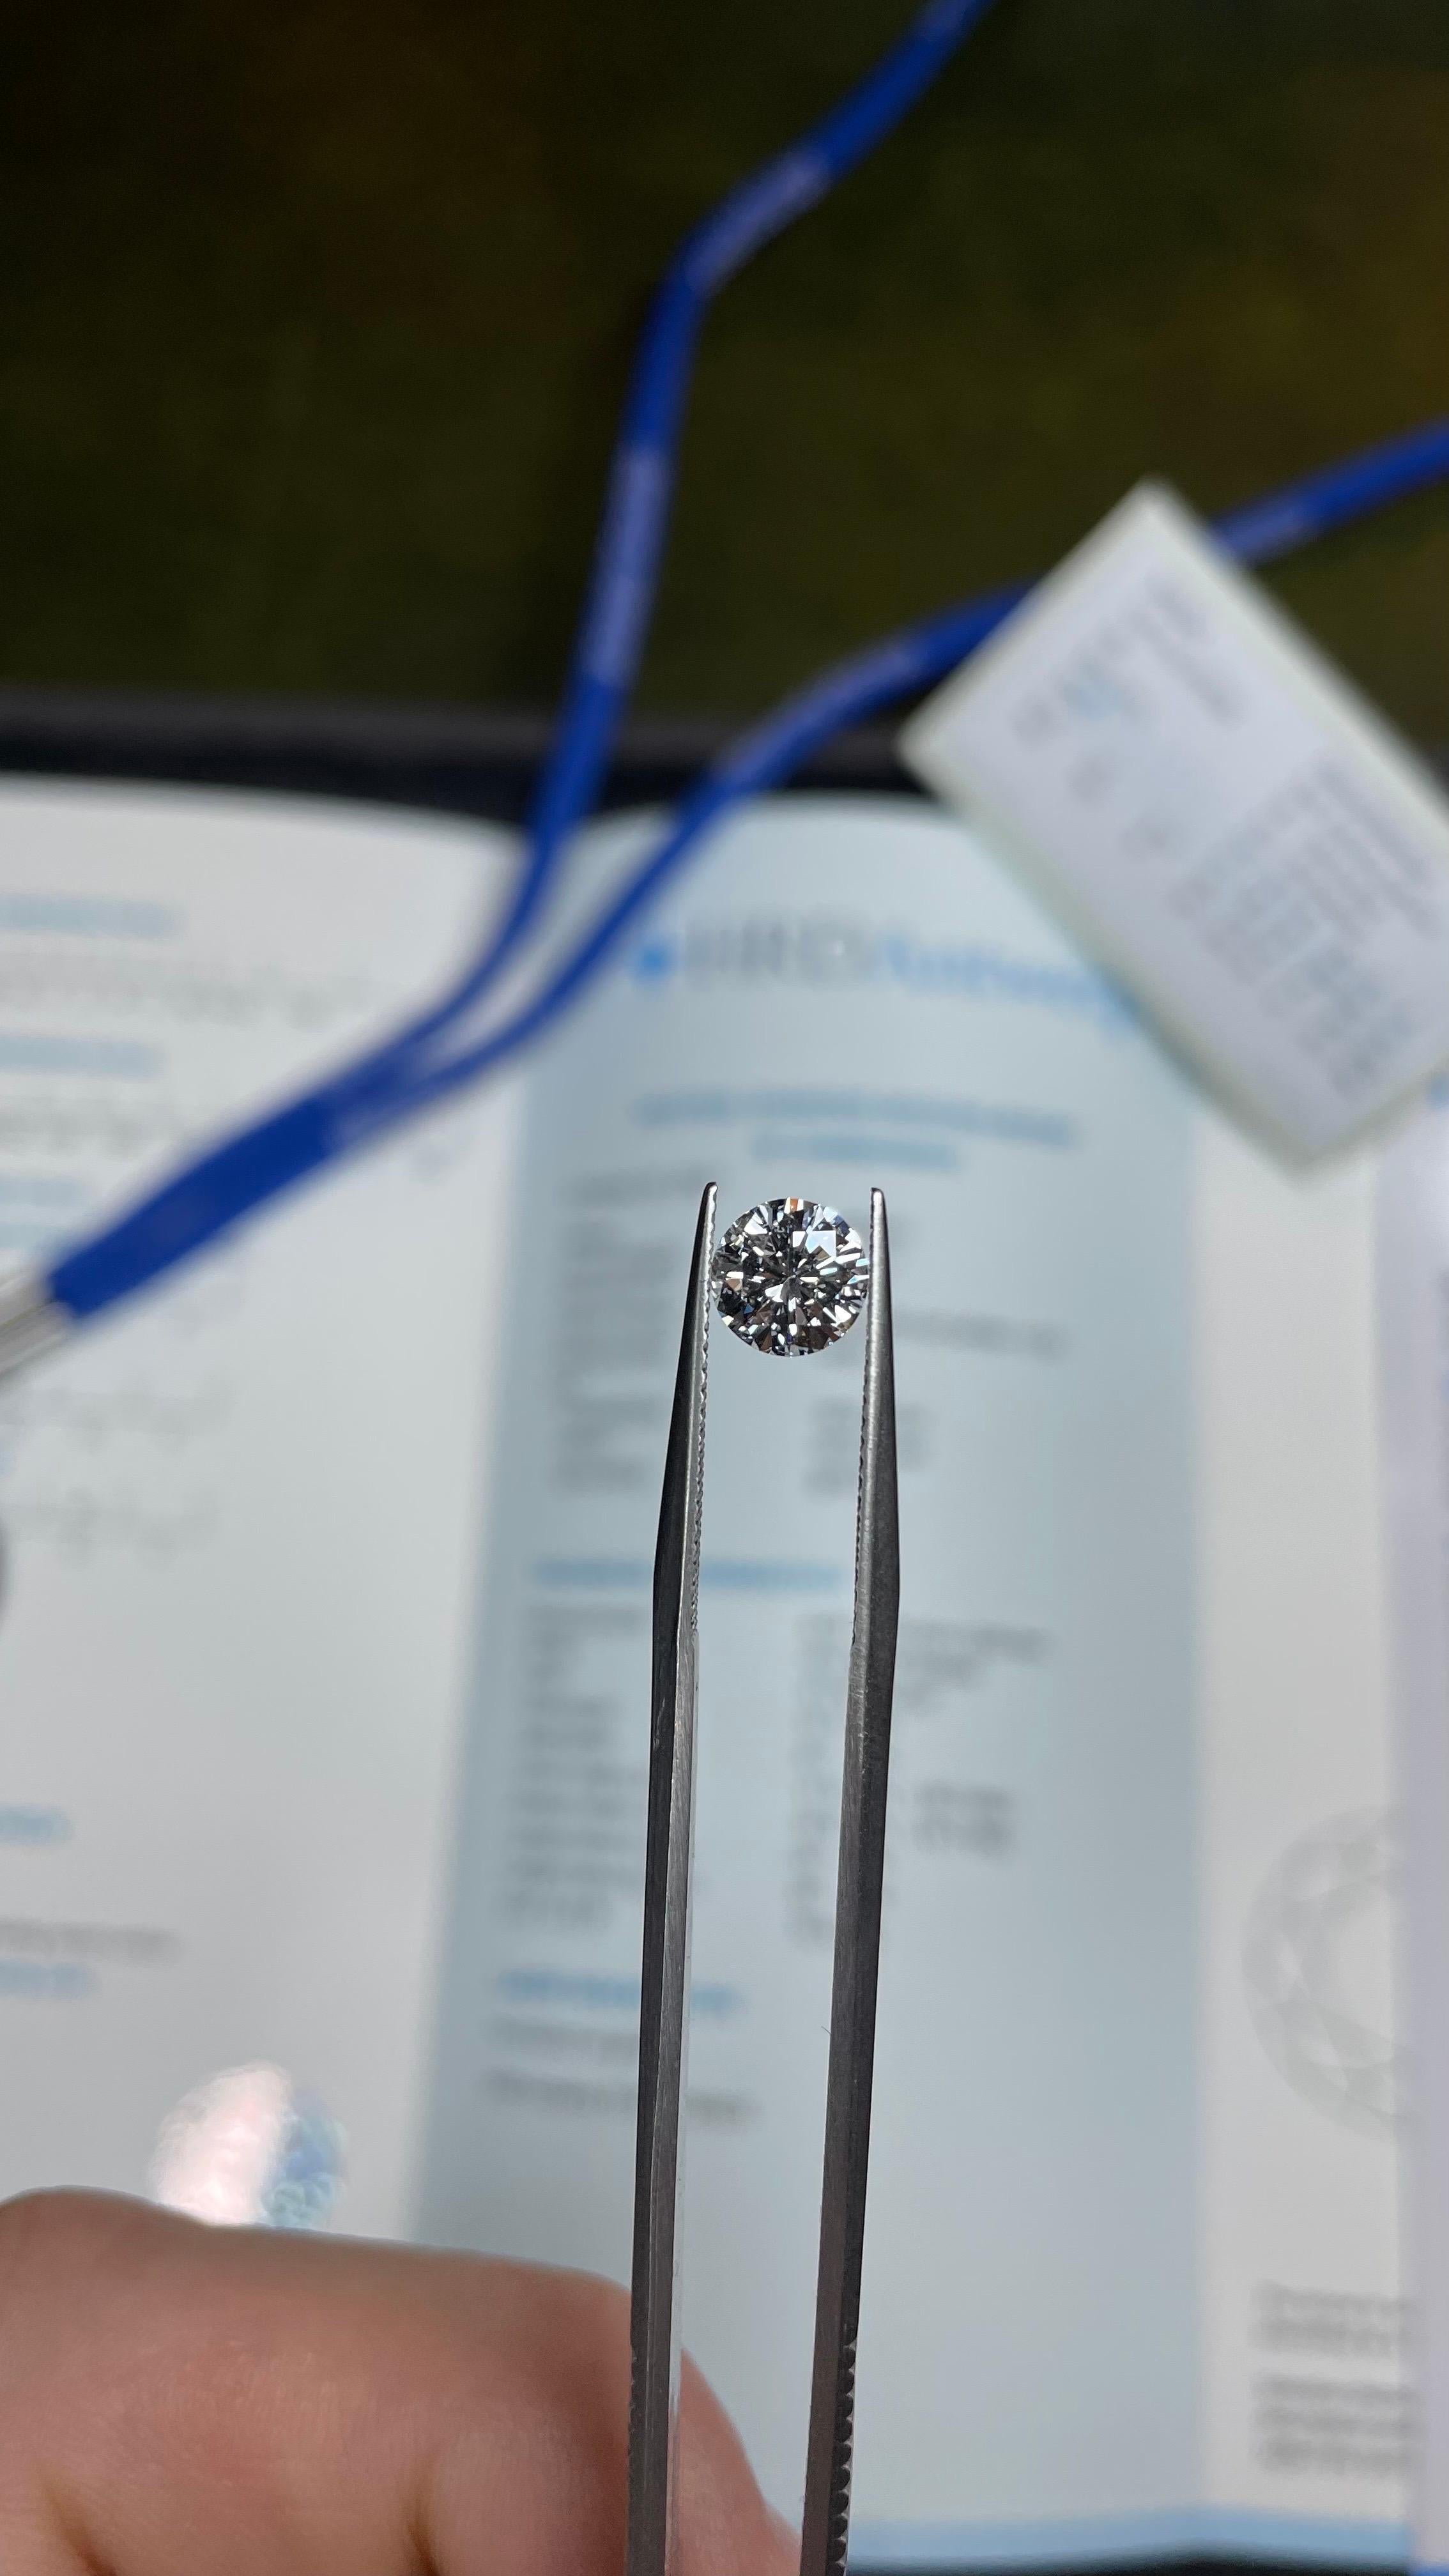  Certified diamond from HRD Antwerp, 

Diamond Details:

Shape: Brilliant
Carat: 1.01
Color: D (Exceptional White+)
Clarity: VVS1 (Very Very Slightly Included, virtually flawless under 10x magnification)
Cut Details:

Proportions: Very Good 
Polish: